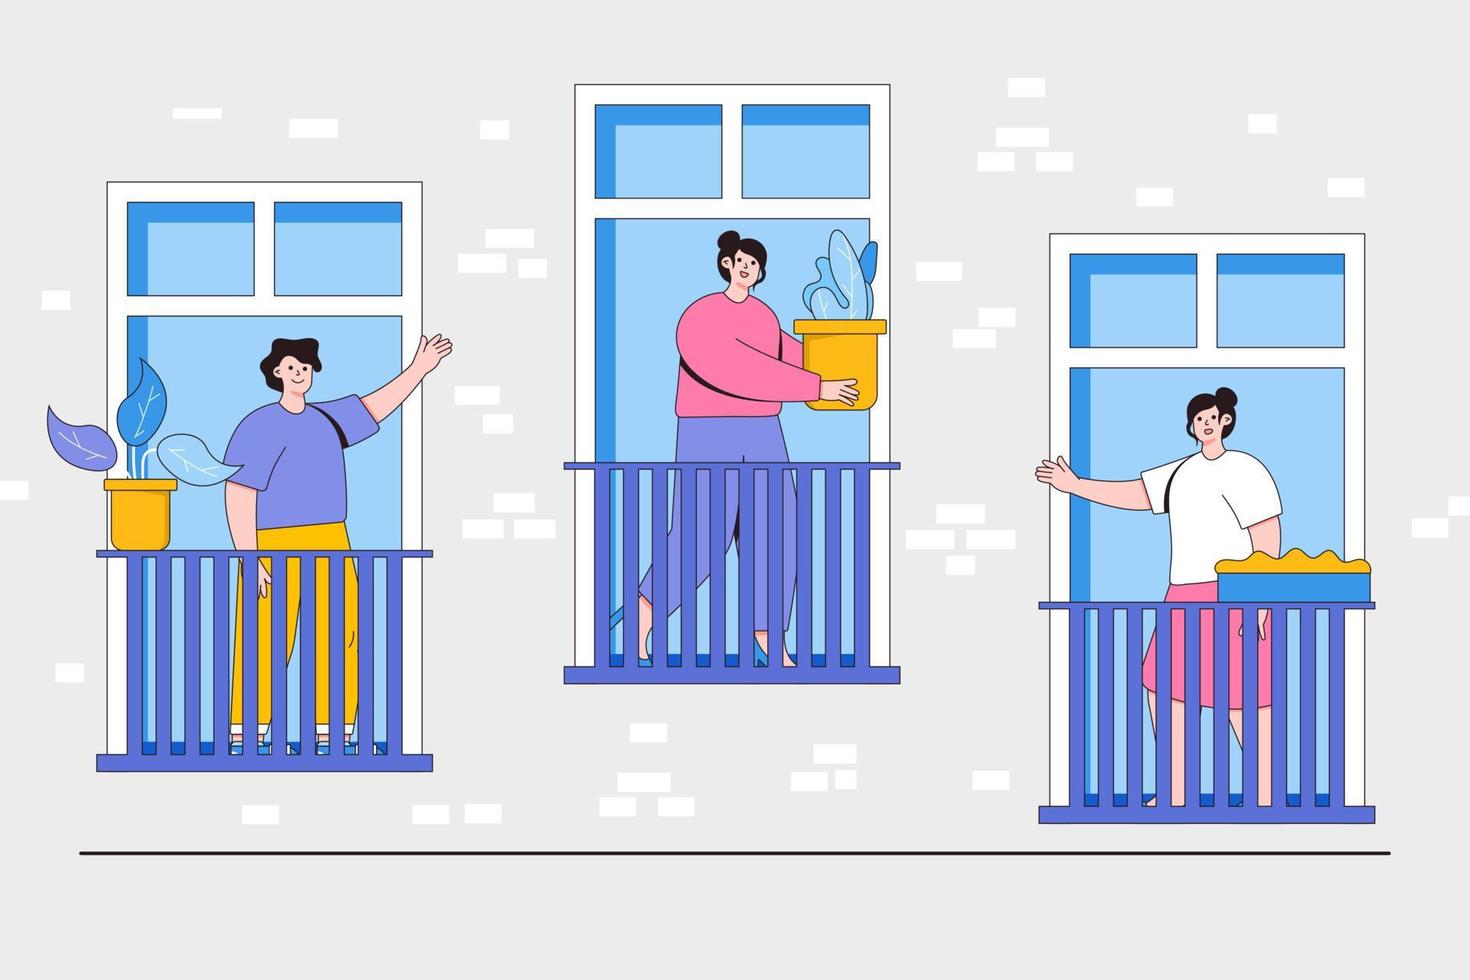 People living behavior, neighborhood concept. People stand on balconies and look out of windows. Building exterior or facade with man, woman and children inside apartments. Flat style illustration vector